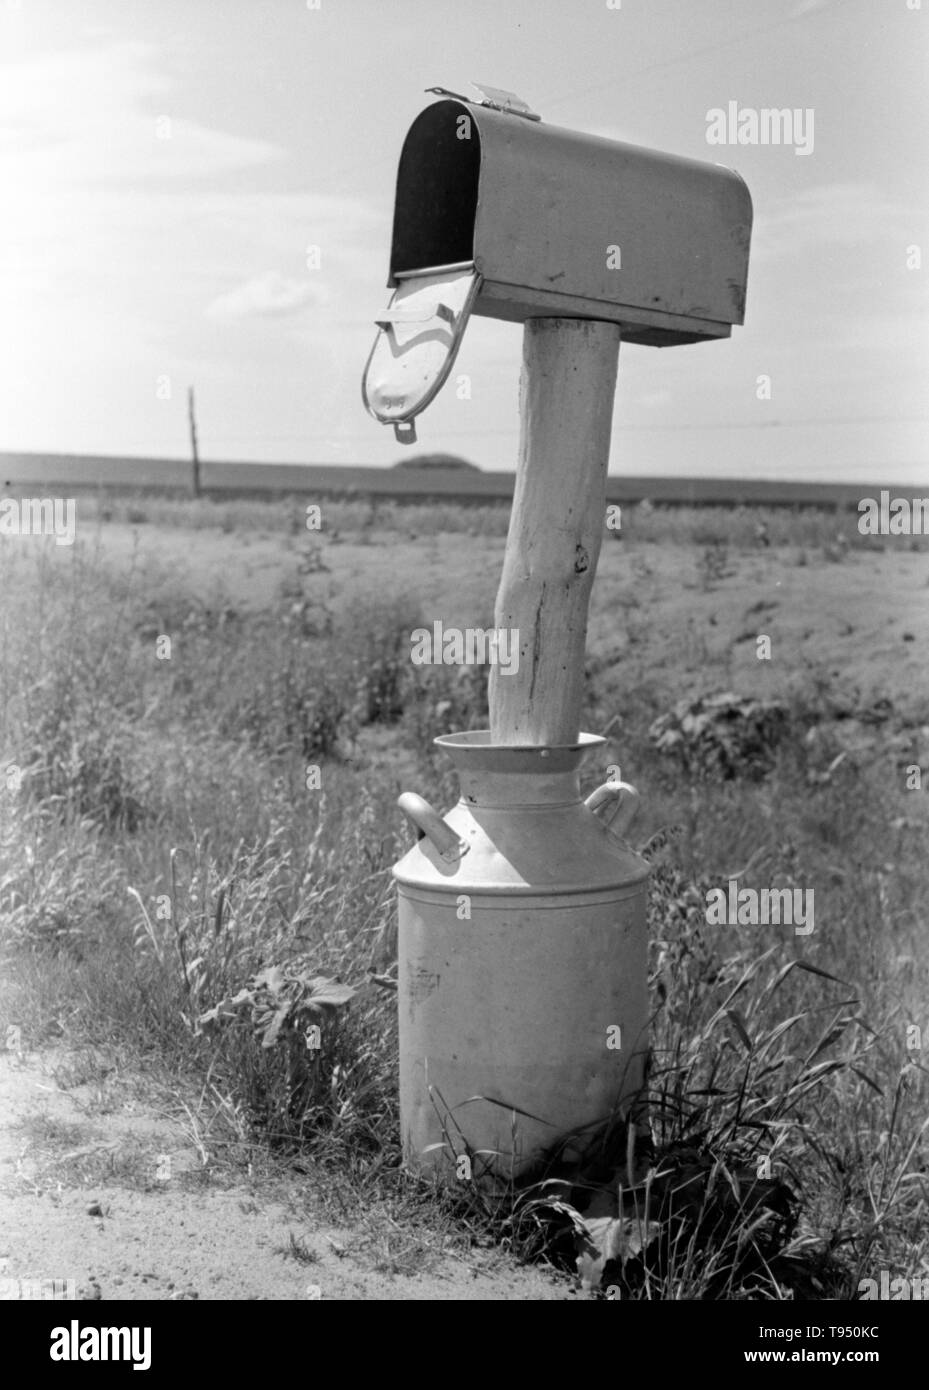 Entitled: 'Mail box set up in milk can near Hydro, Oklahoma.' Before the introduction of rural free delivery (RFD) by the Post Office in 1896, many rural residents had no access to the mail unless they collected it at a post office located many miles from their homes or hired a private express company to deliver it. For this reason, mailboxes did not become popular in rural America until curbside RFD mail delivery by the Post Office was an established service. Stock Photo